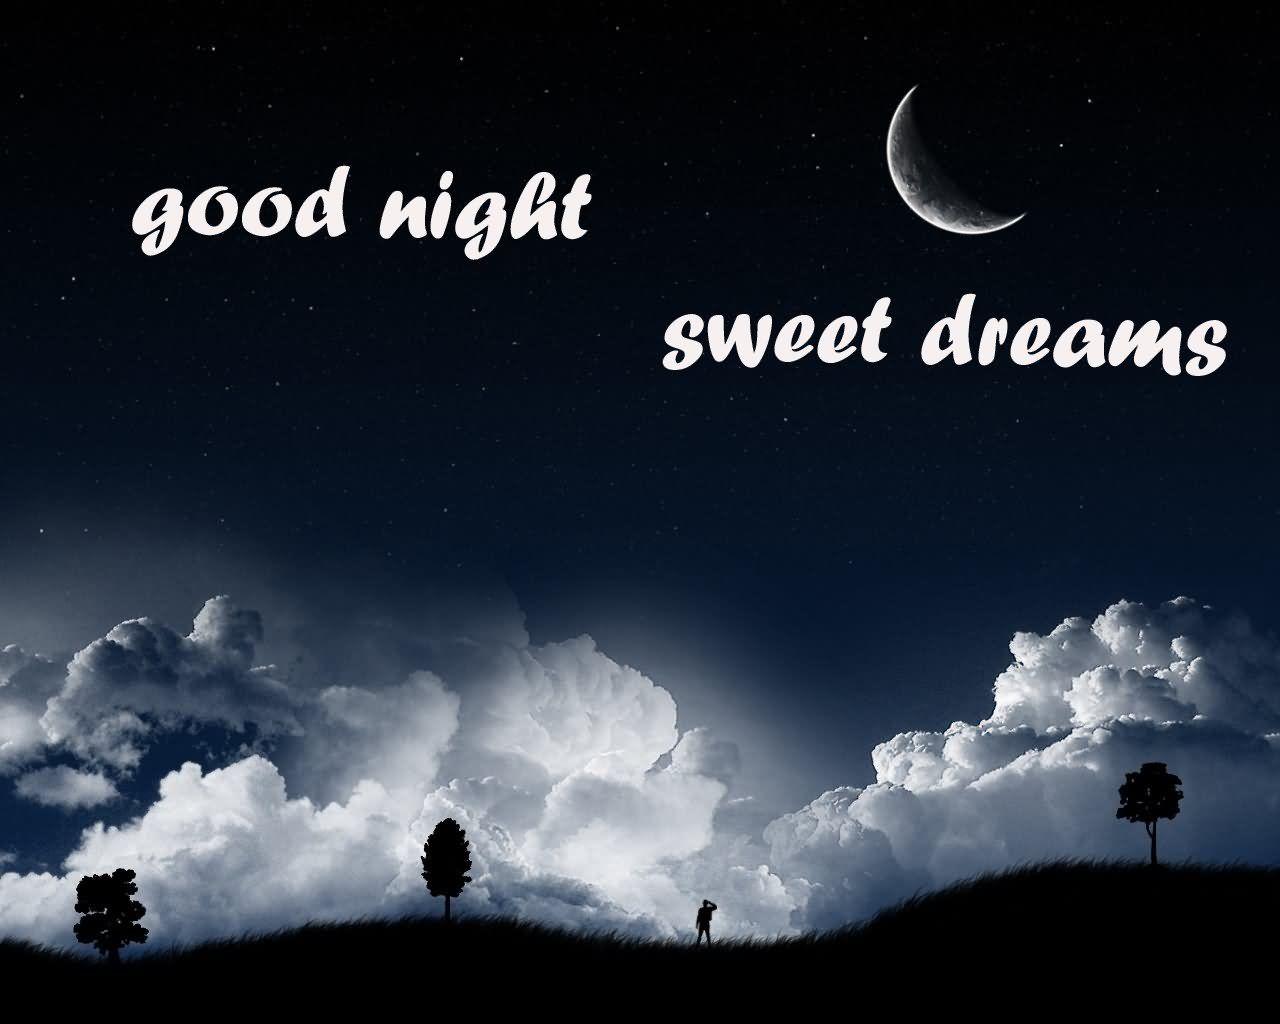 Dreams night good sweet pictures Good Night